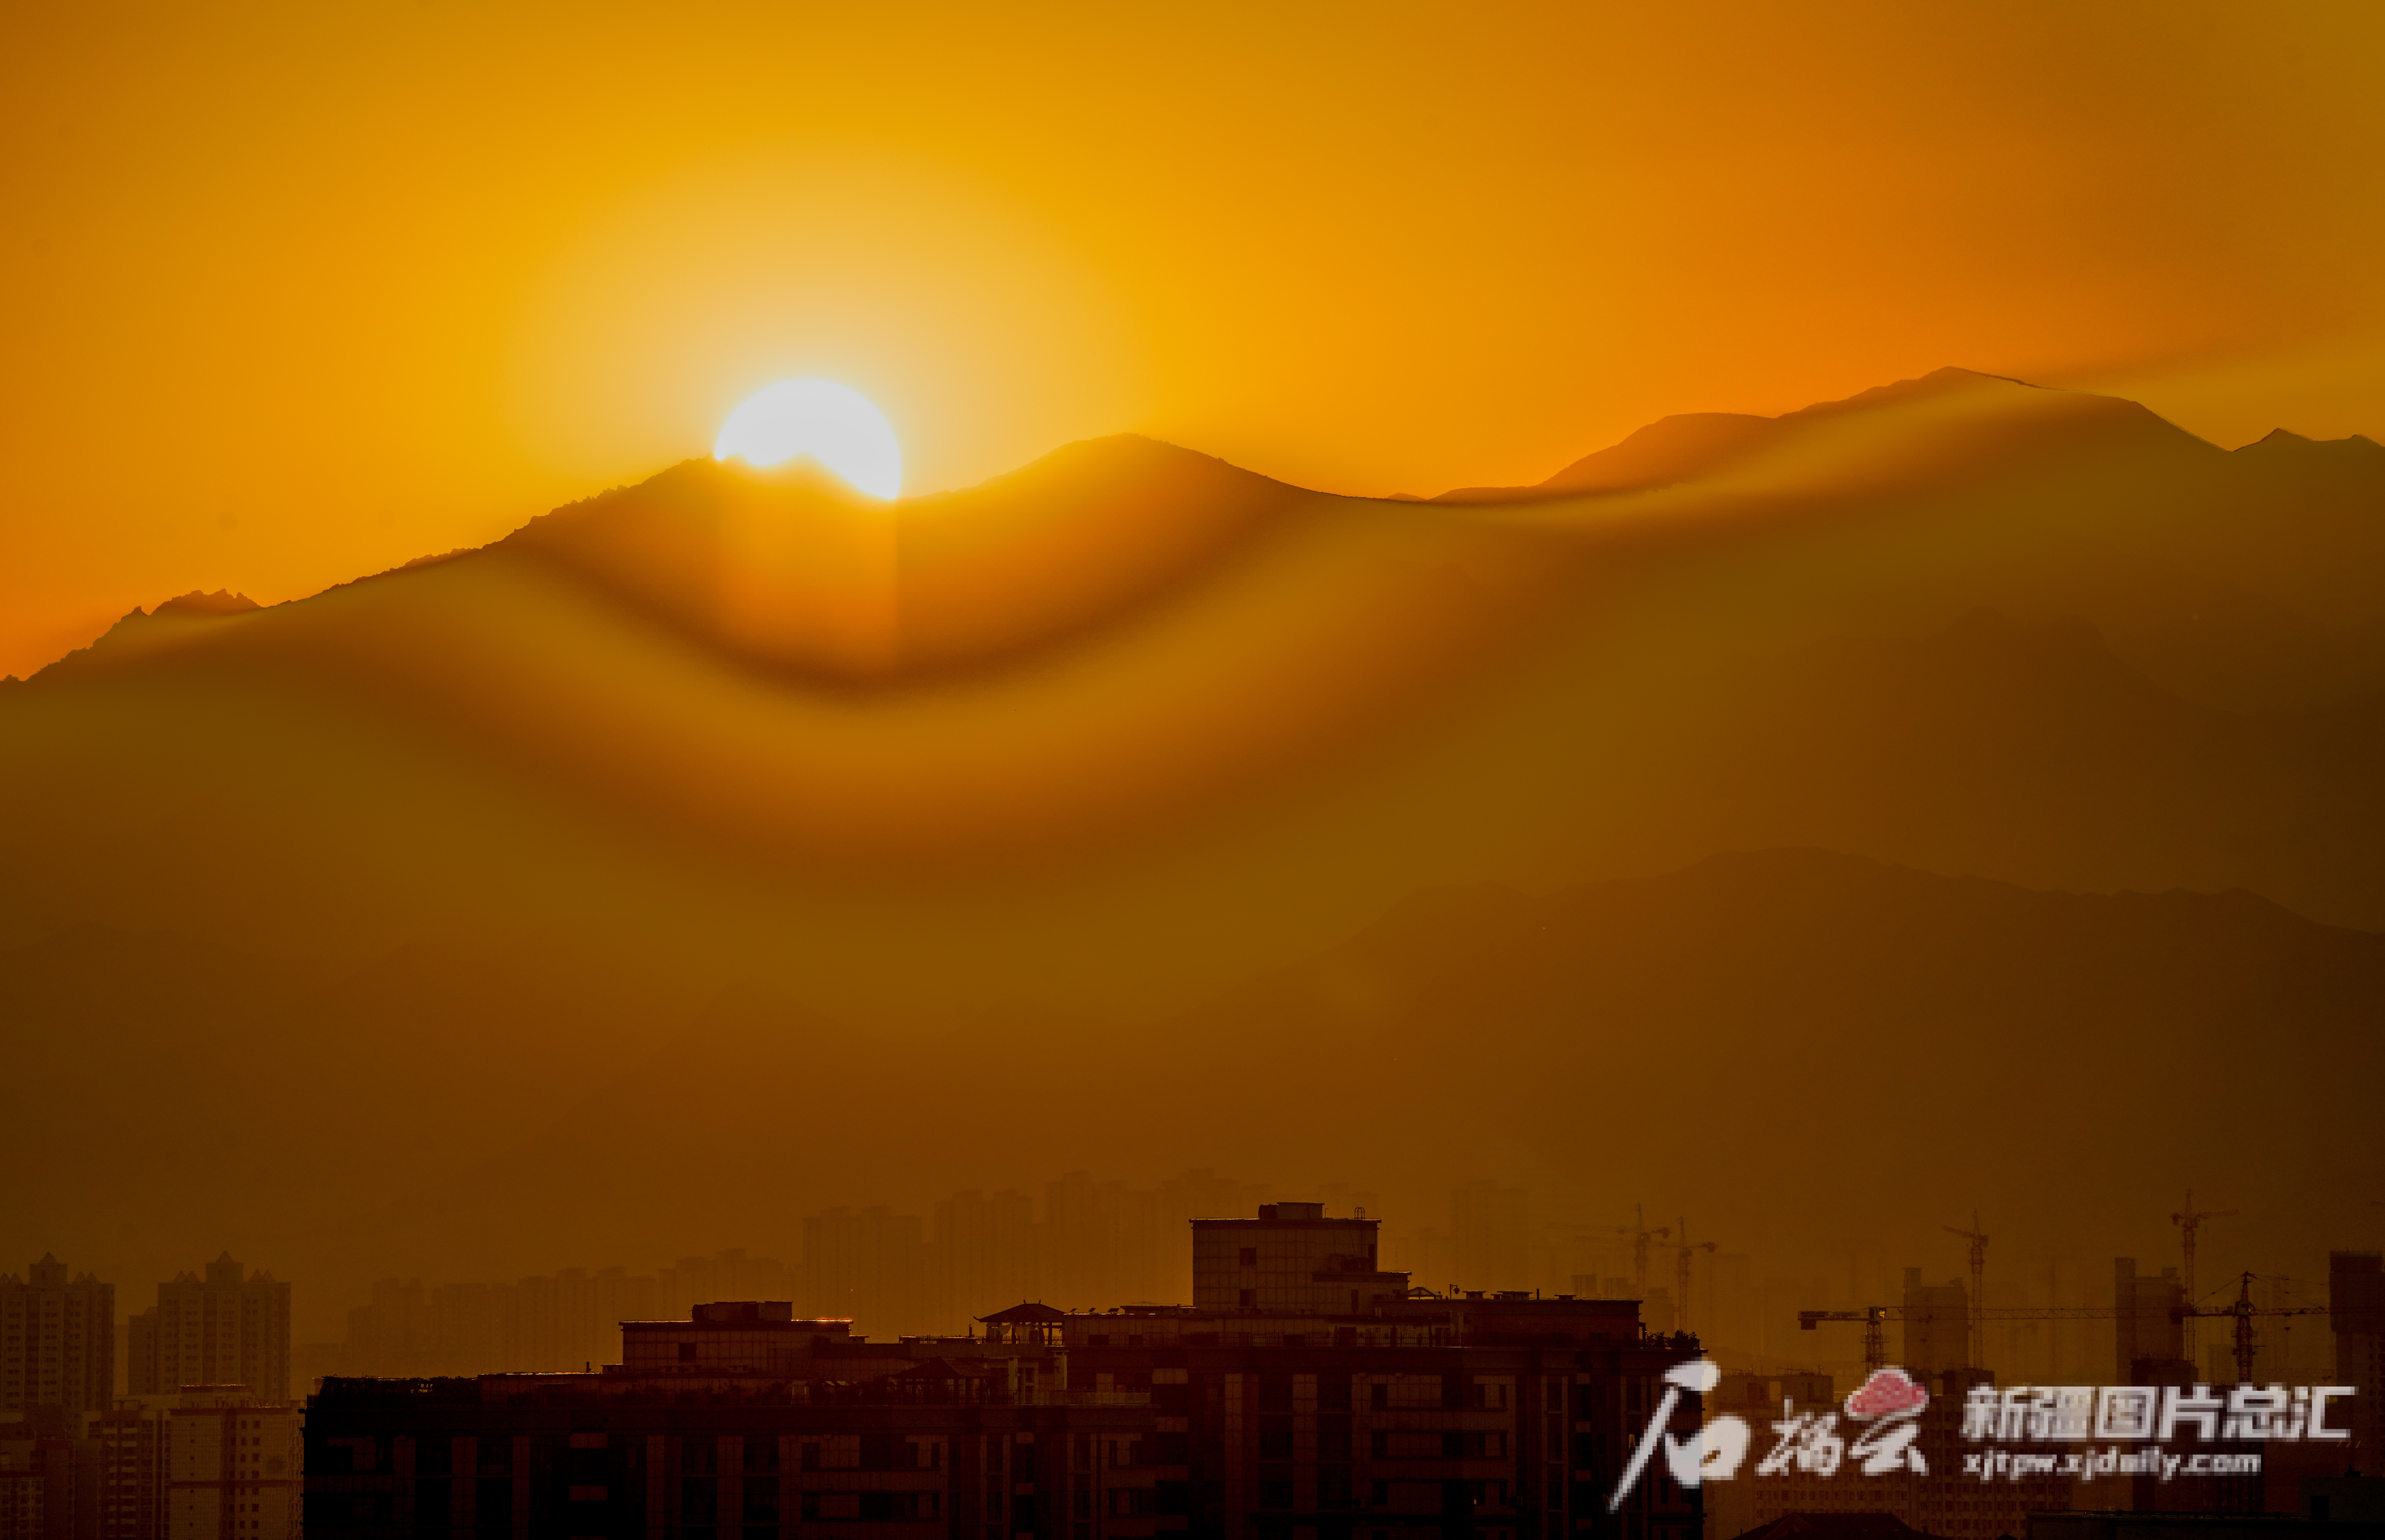 The highest temperature in the end of the East Xinjiang today can reach 37 ° C or more